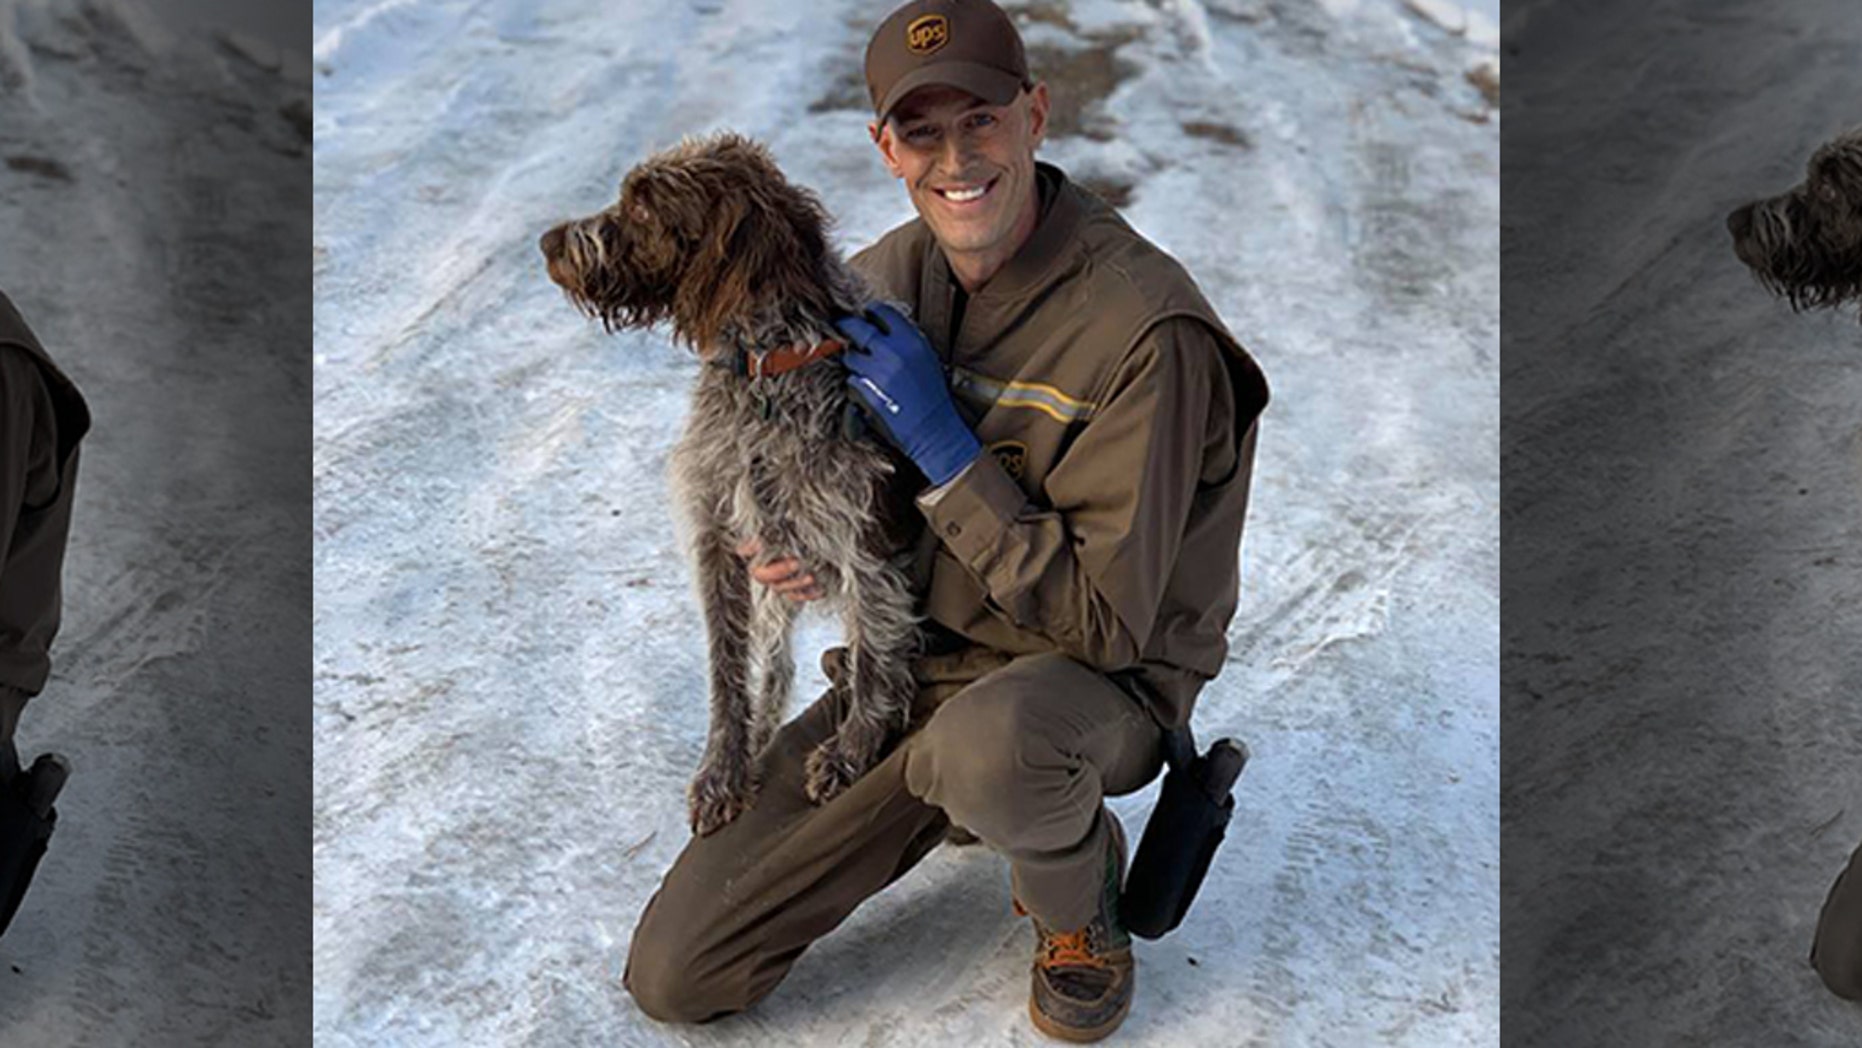 UPS driver rescues dog from icy Montana pond mid-route